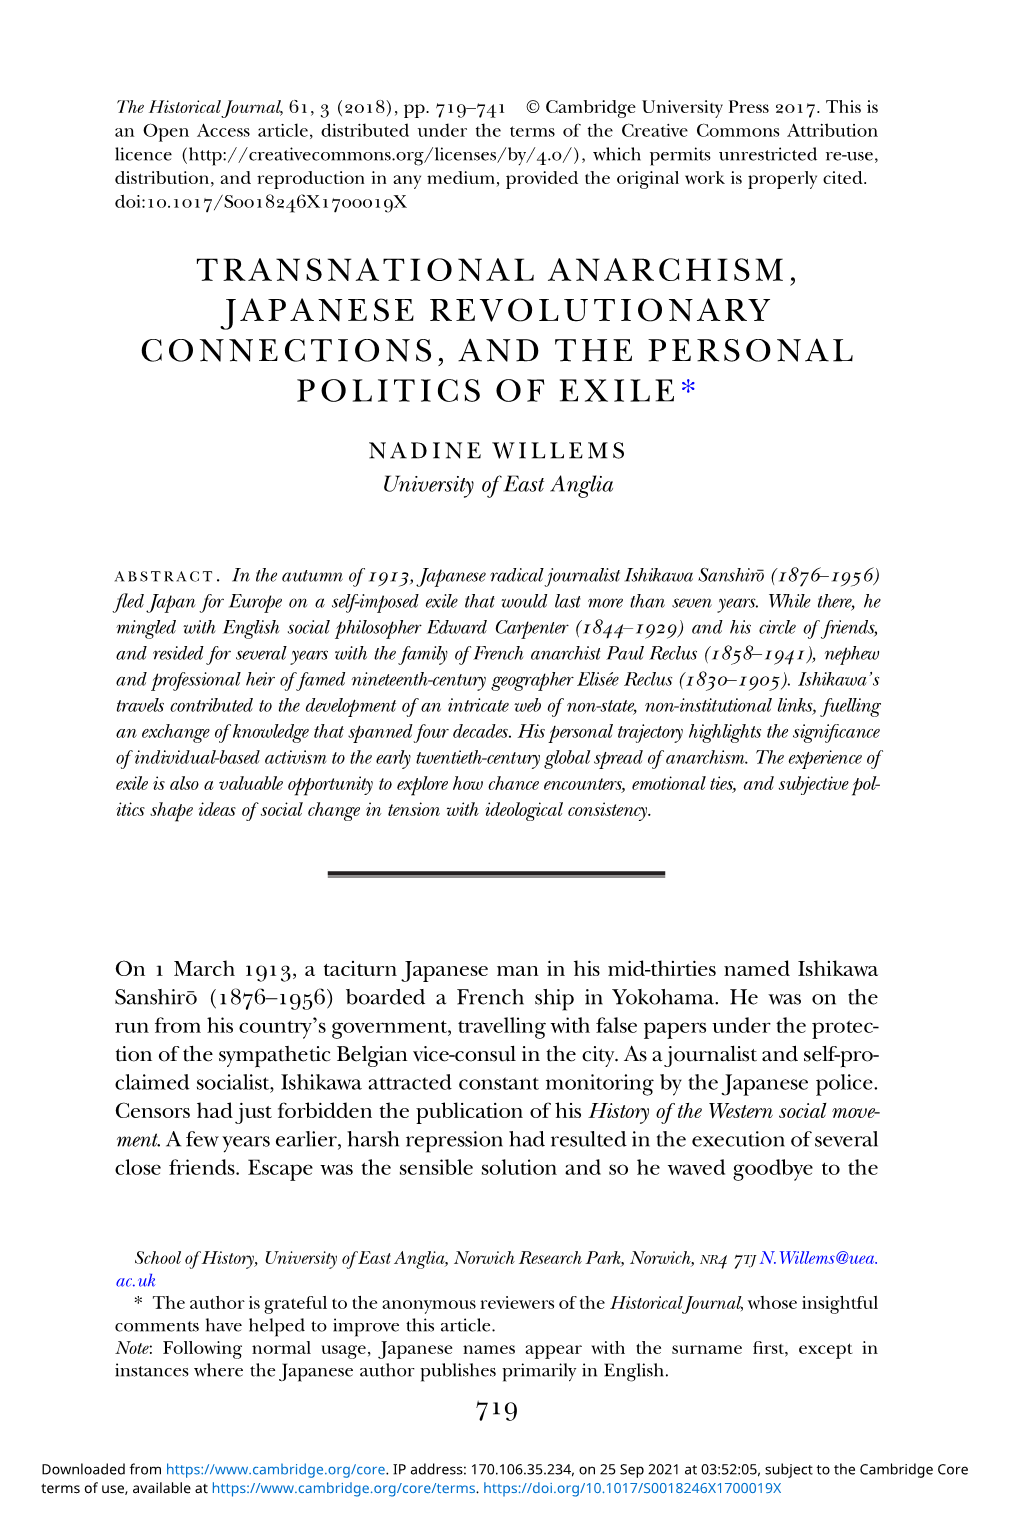 Transnational Anarchism, Japanese Revolutionary Connections, and the Personal Politics of Exile*